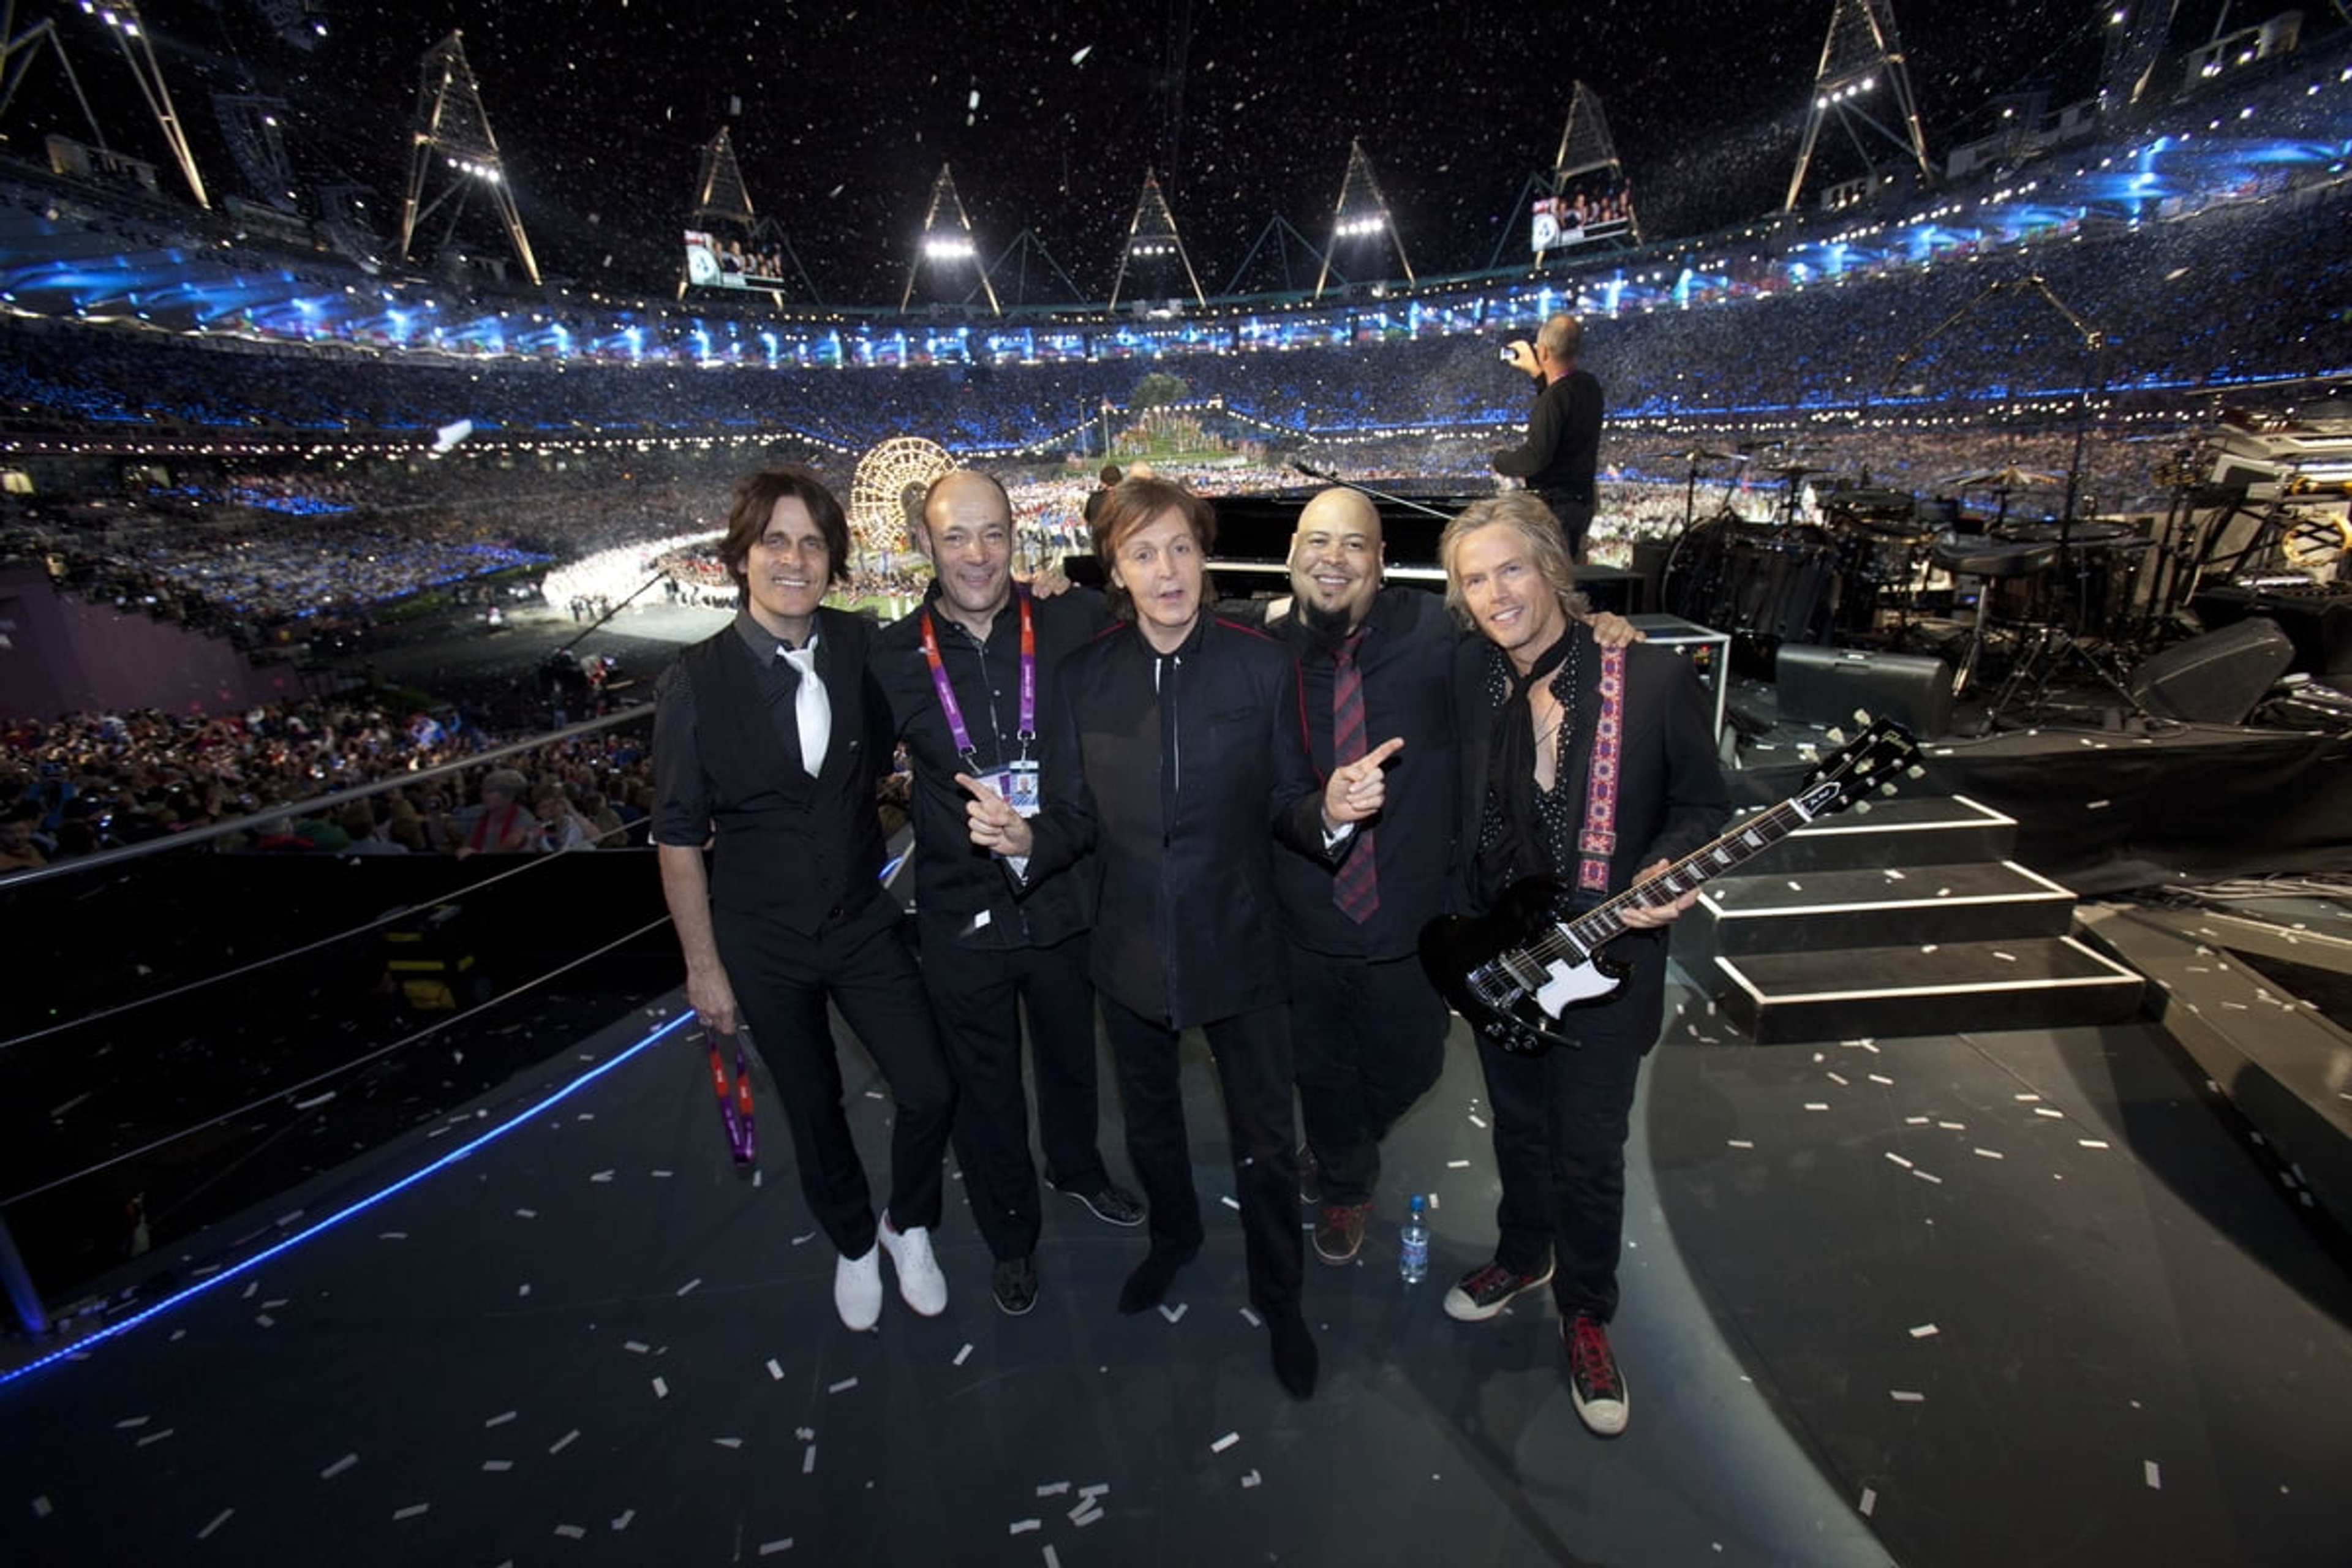 Rusty, Wix, Paul, Abe and Brian on stage at the Olympics Opening Ceremony, London, 27-Jul-12